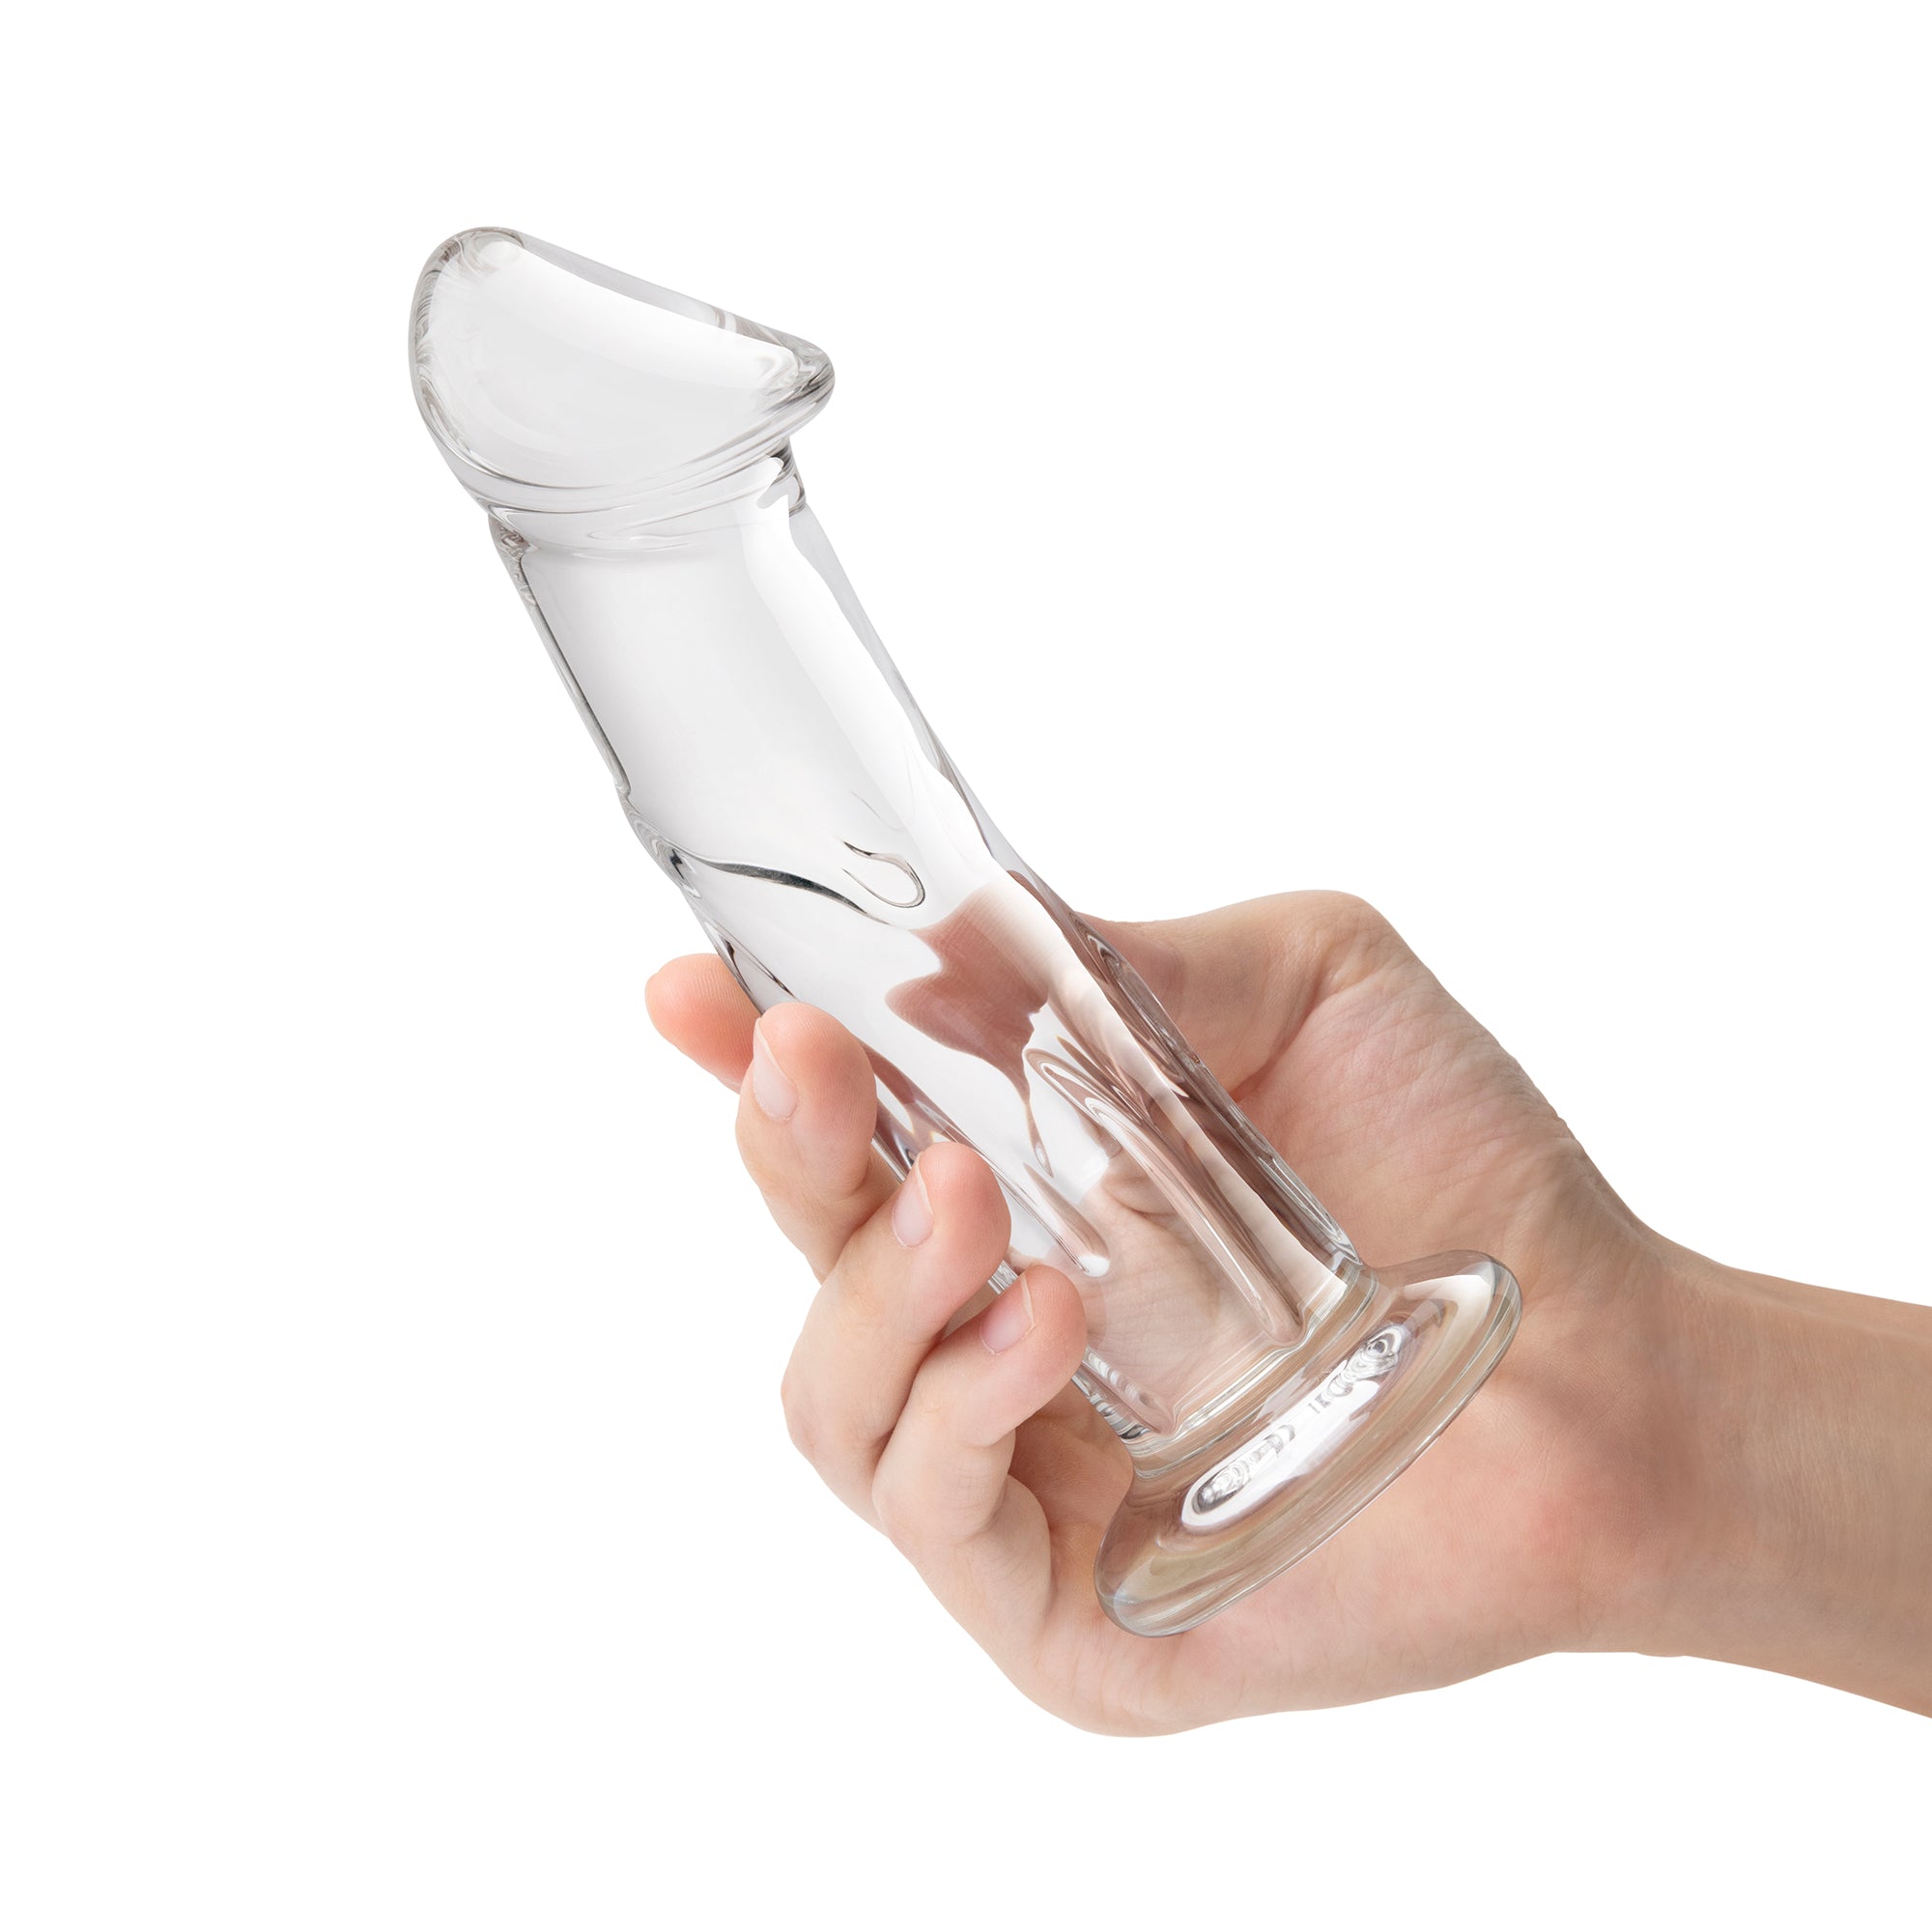 6" Glass Dildo With Veins & Flat Base